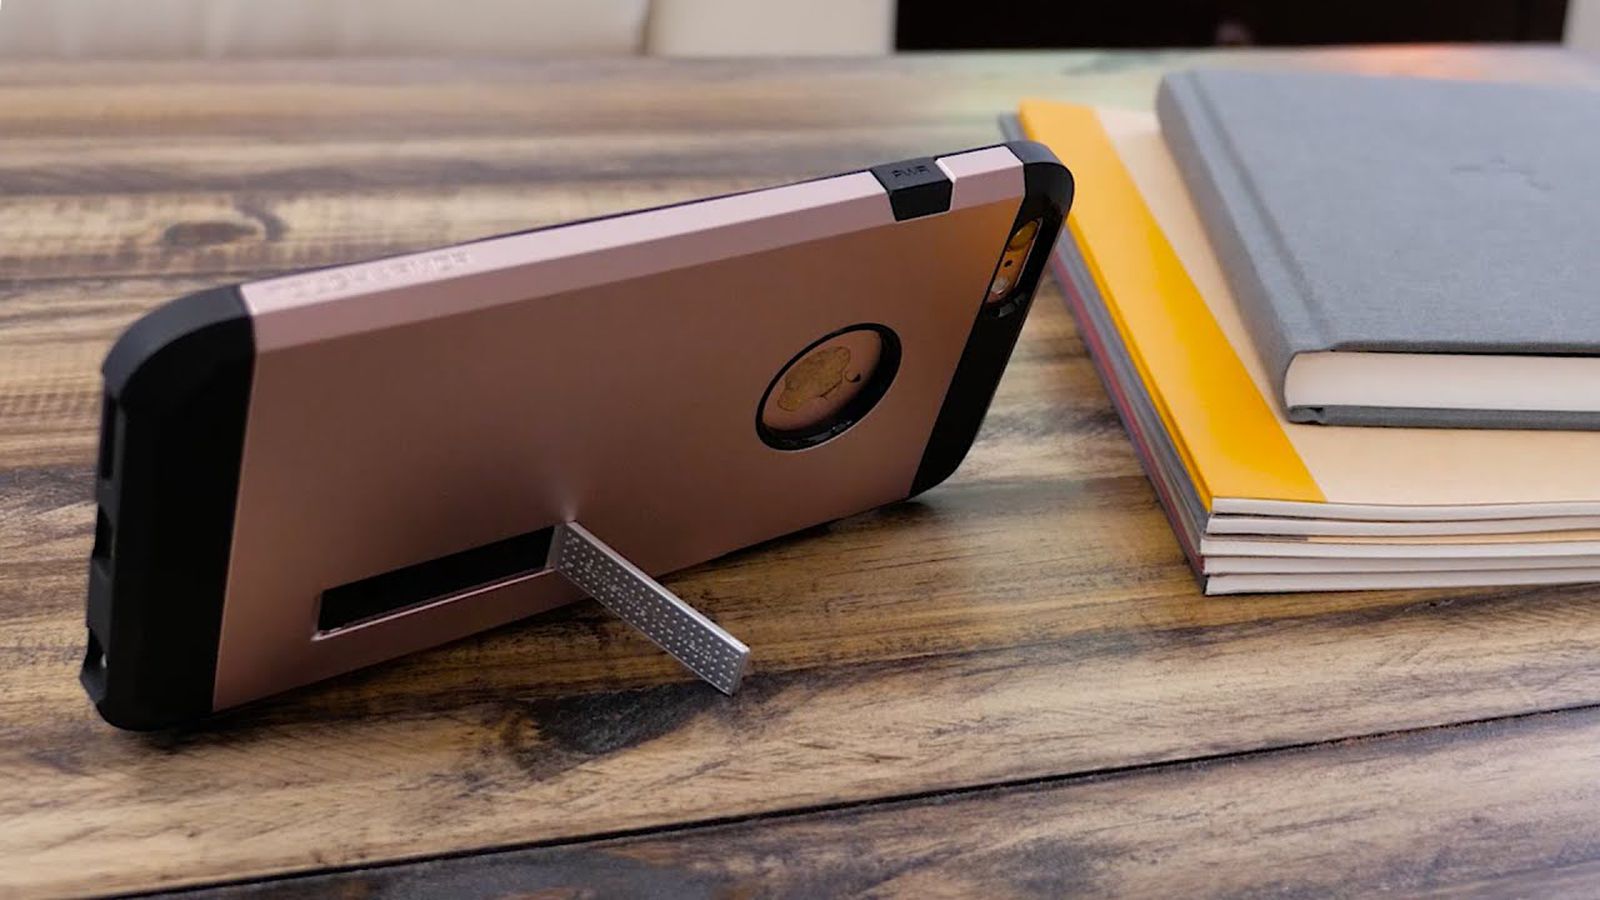 Video Review: Spigen’s Cases for the iPhone 6s and the iPhone 6s Plus